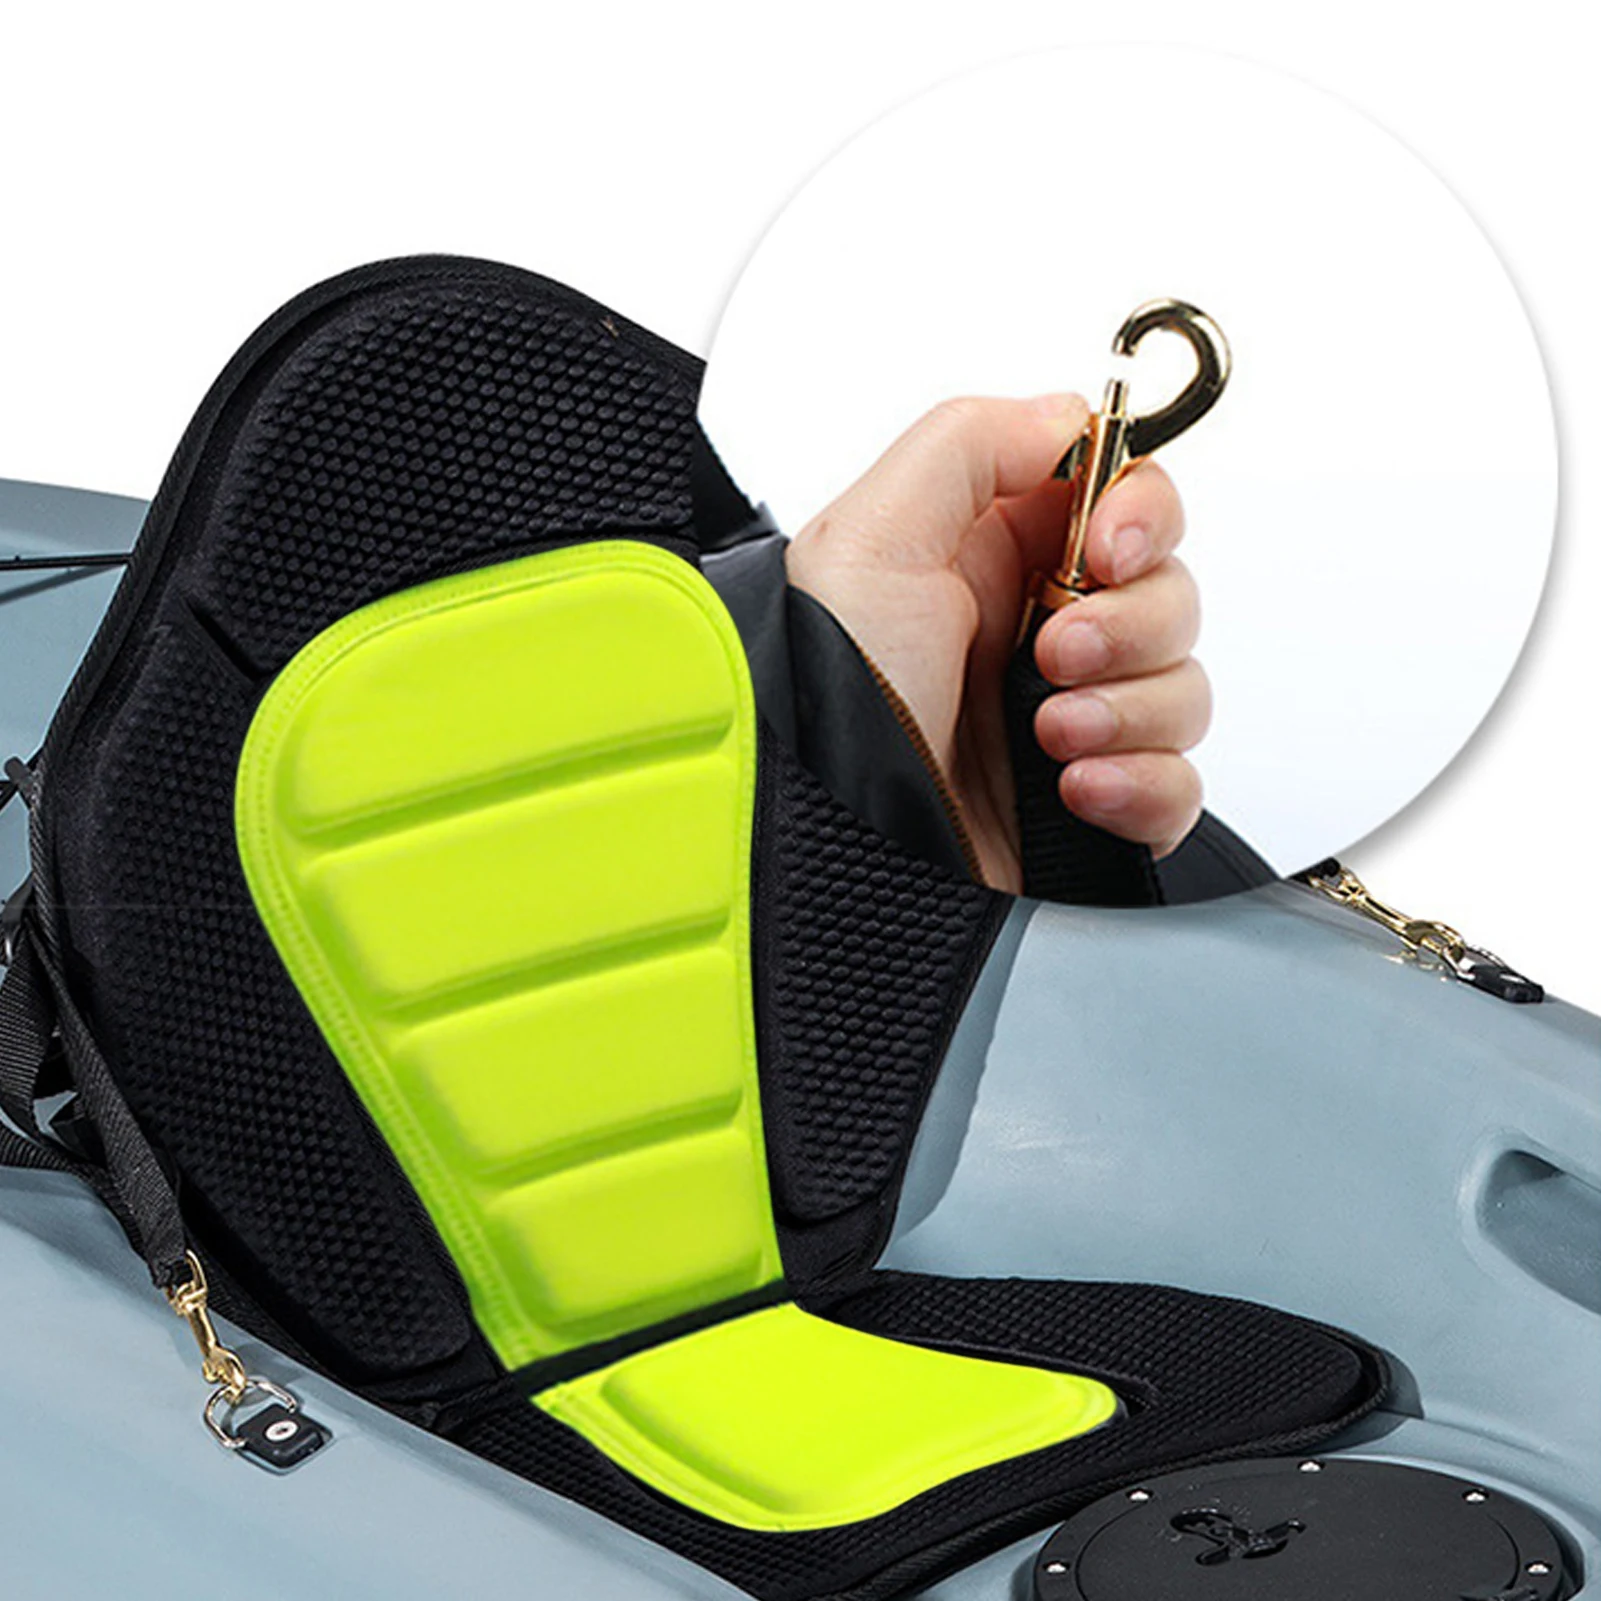 https://ae01.alicdn.com/kf/S7c16bc154c7a481abefe6bf82a3360a8M/Kayak-Seat-Canoe-Seats-With-Back-Support-Adjustable-High-Backrest-Boat-Seat-Cushioned-Fishing-Seat-For.jpg